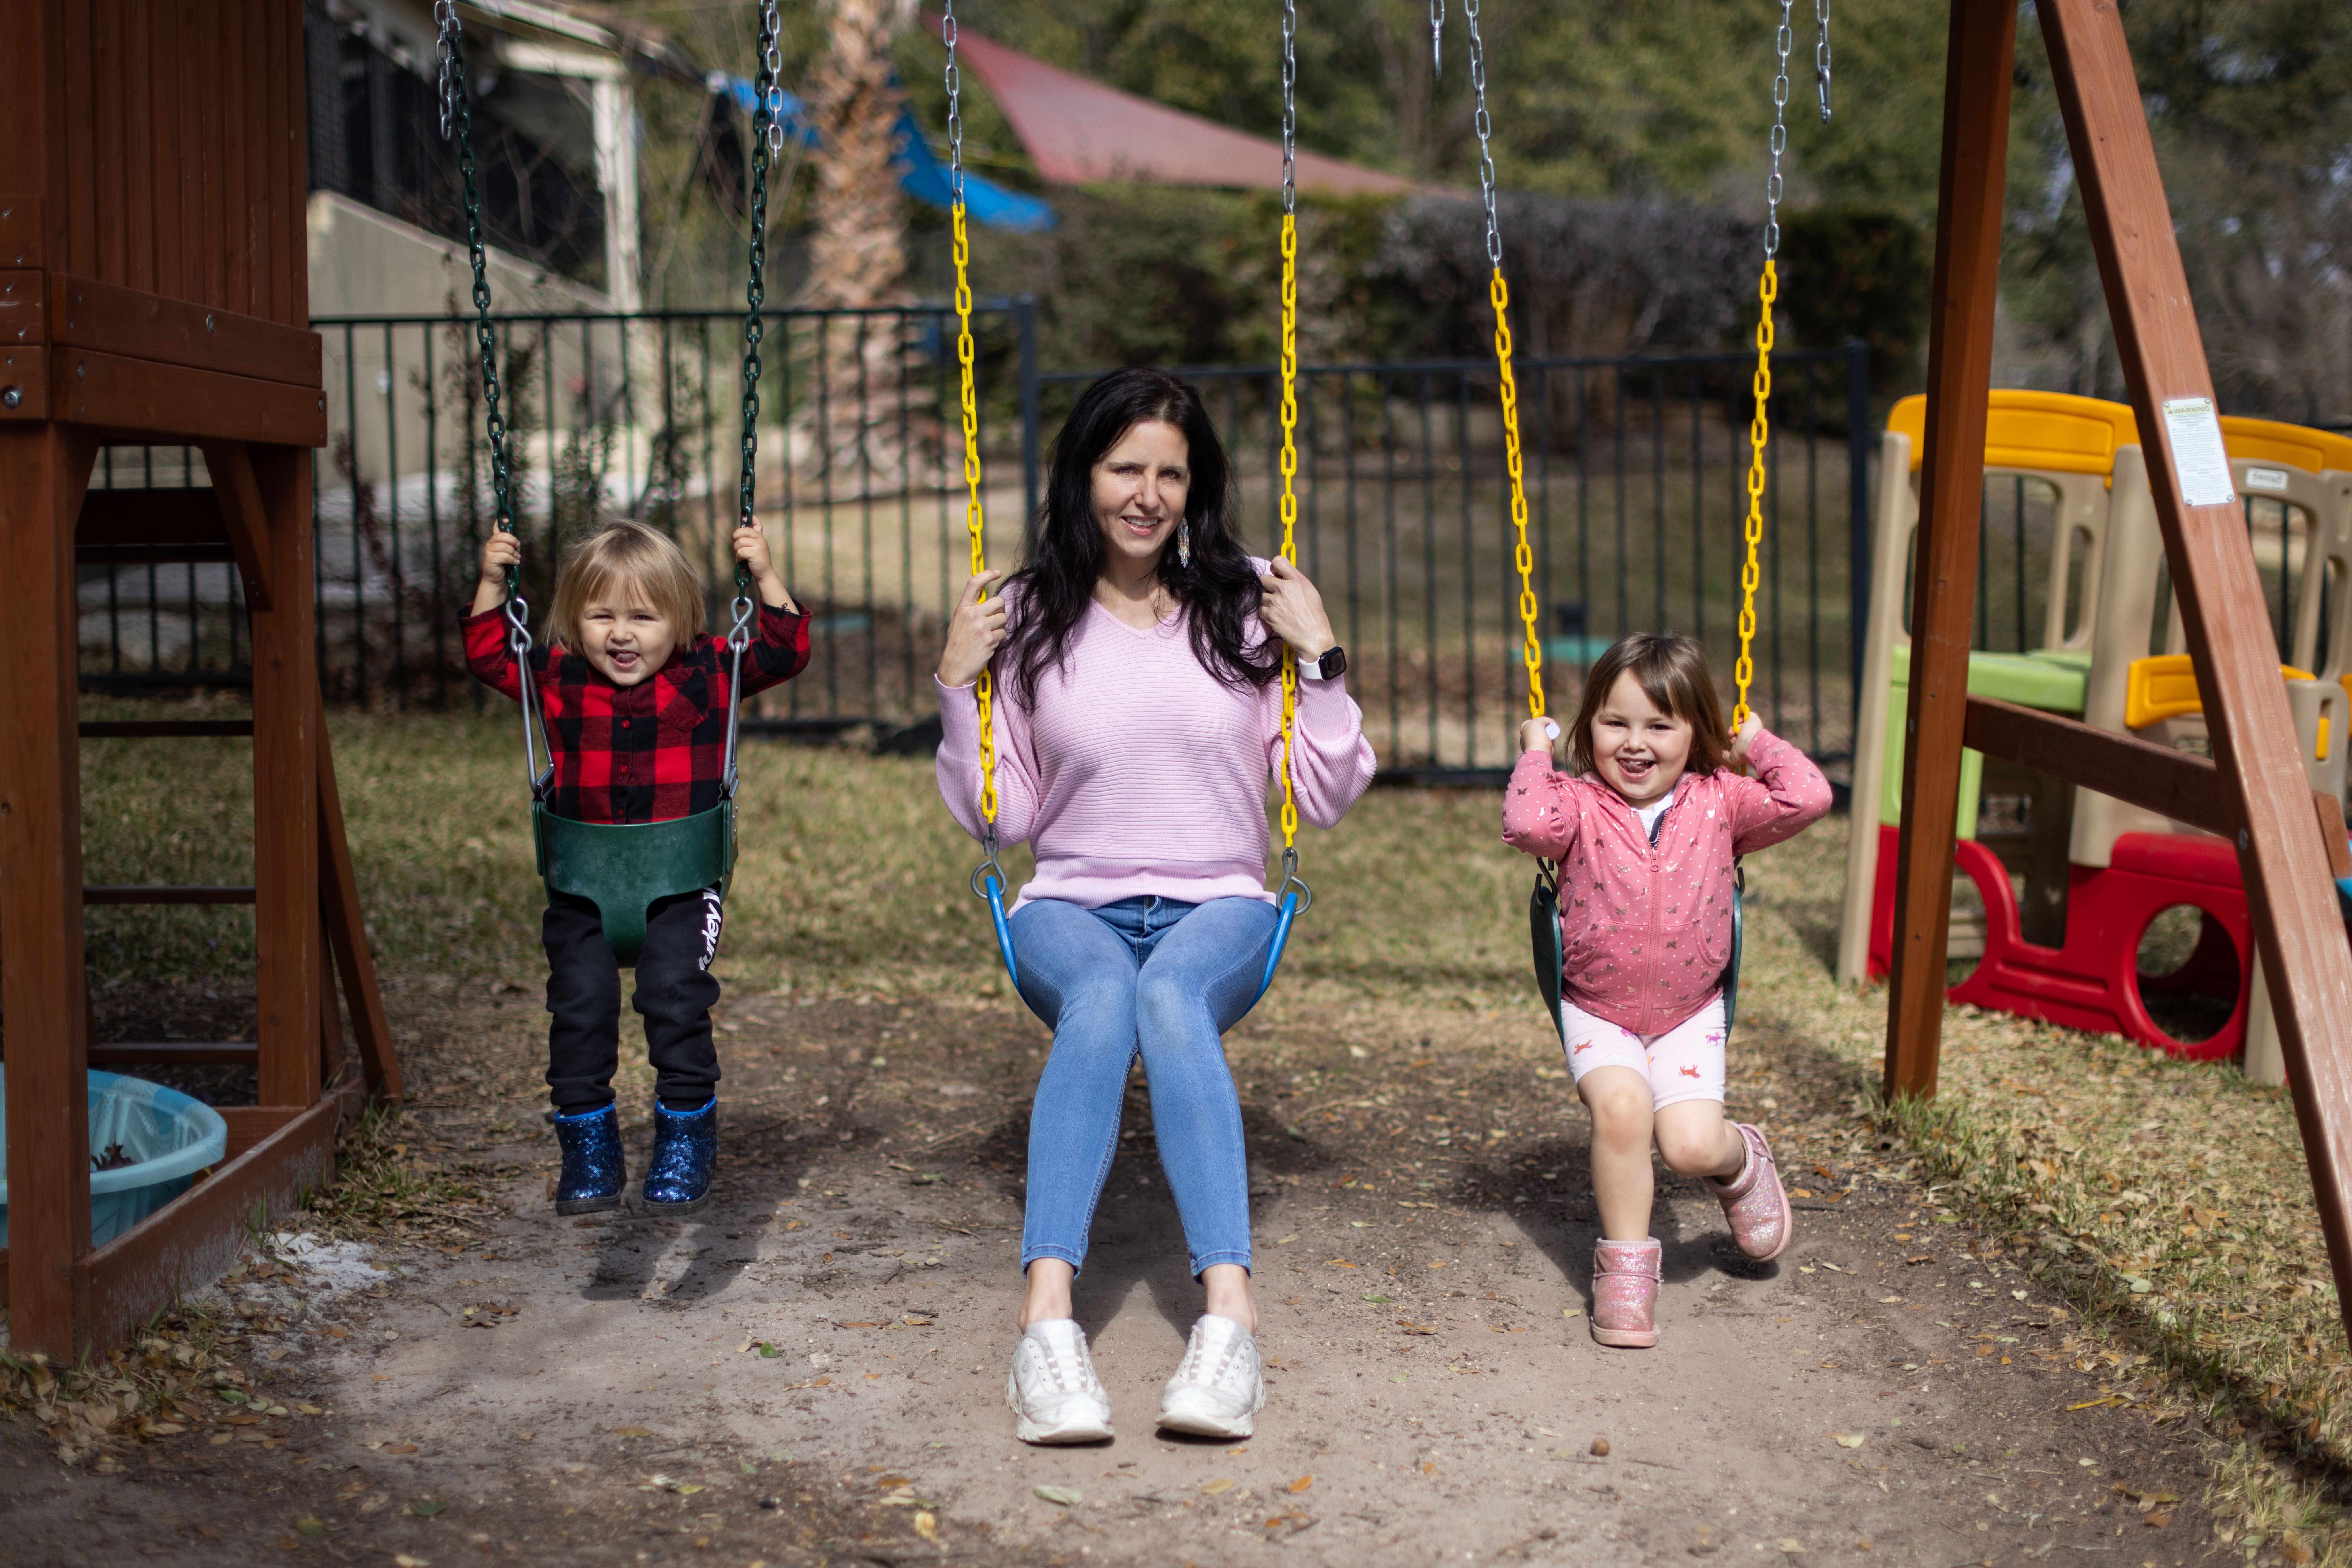 Bianca King with her children on a swing set in her back yard.